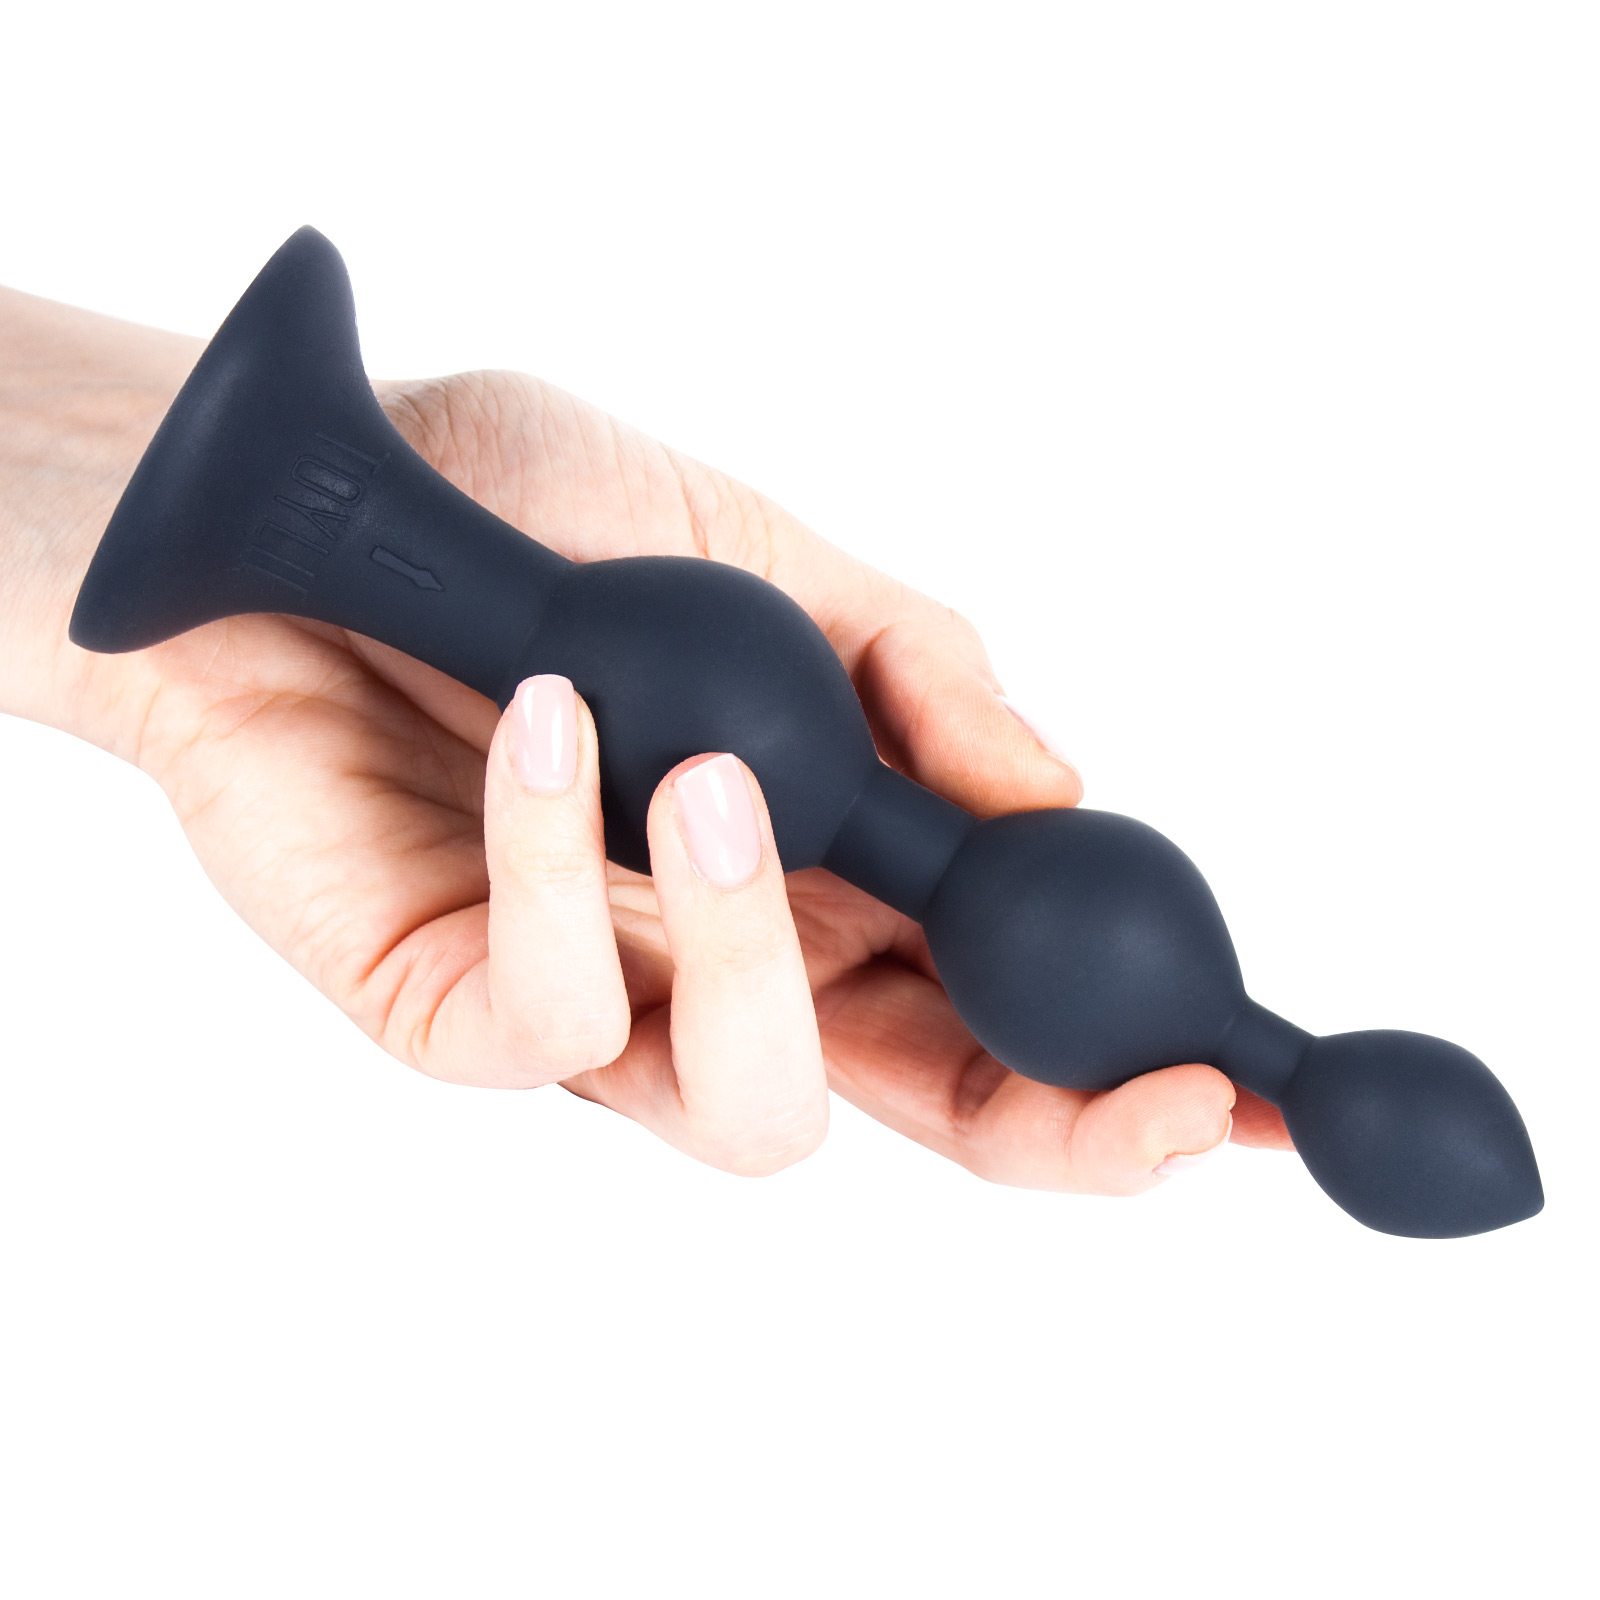 Toylie Silikon Anal Dildo «Bullet» black, velvety smooth anal dildo for her and him with suction cup